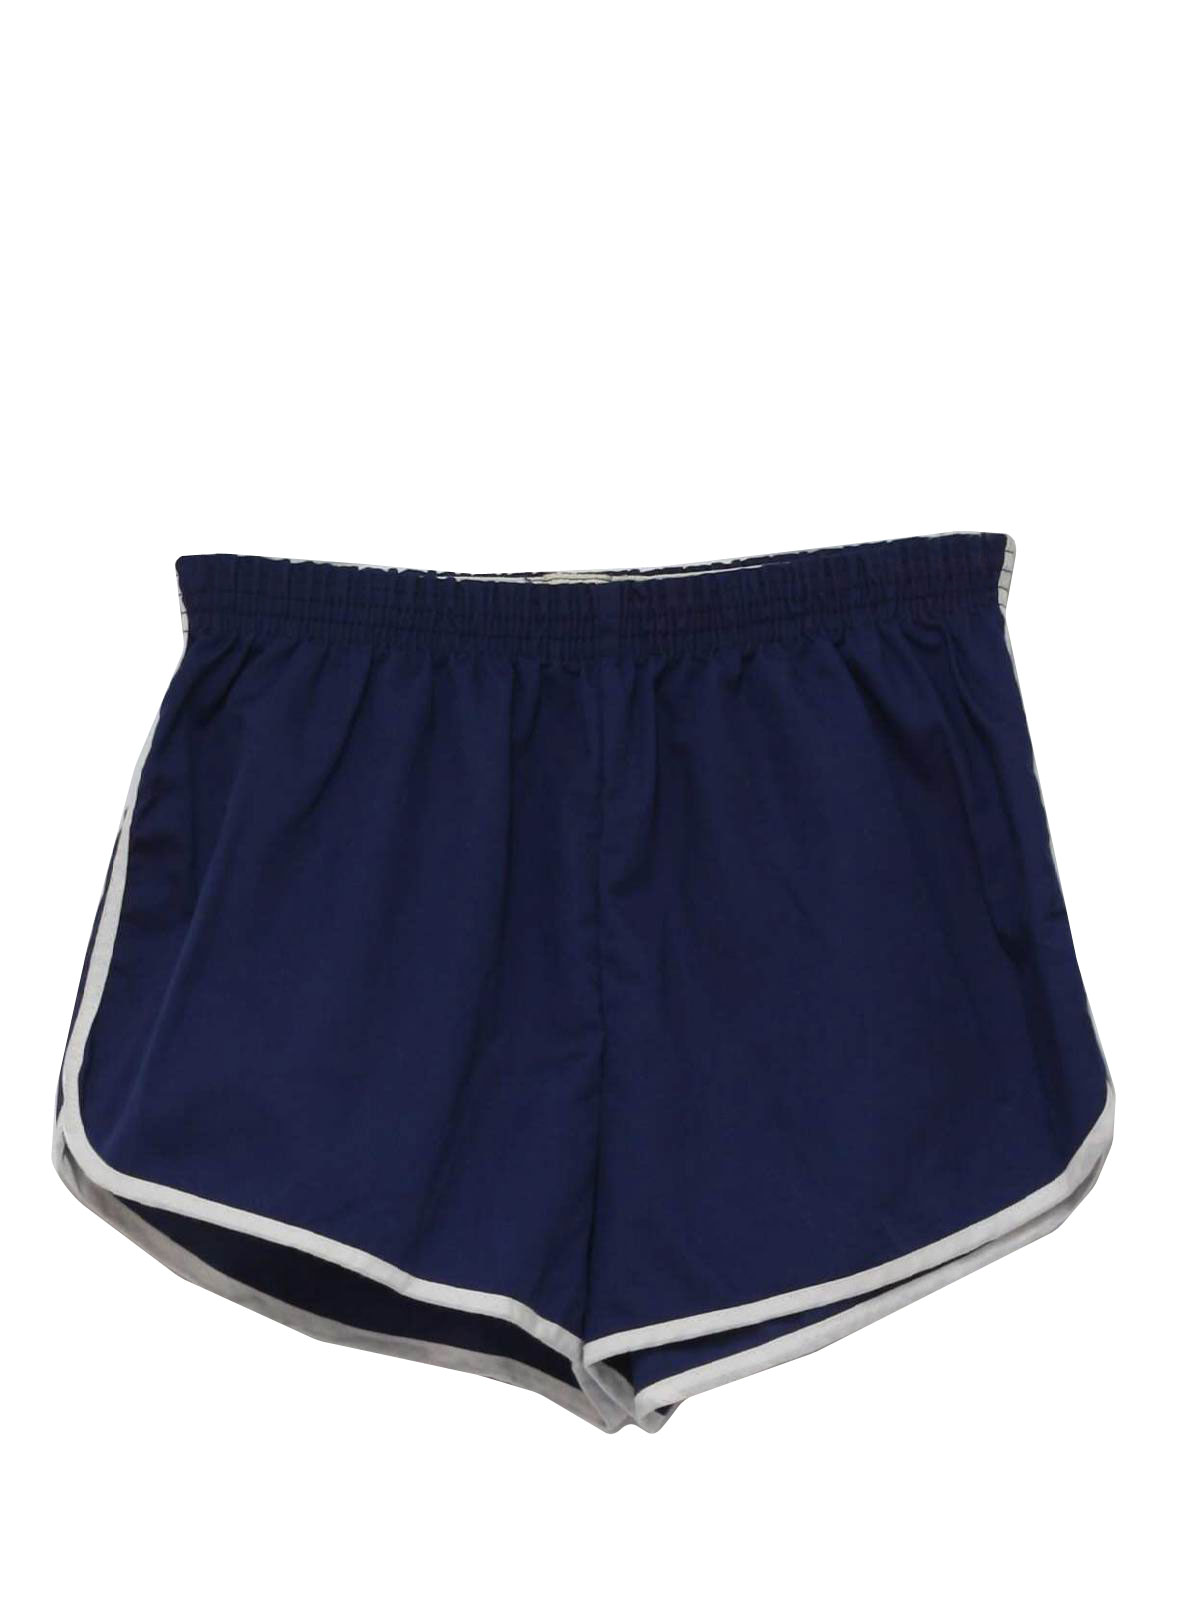 Retro 1980s Shorts: 80s -Sears- Mens royal blue background polyester ...